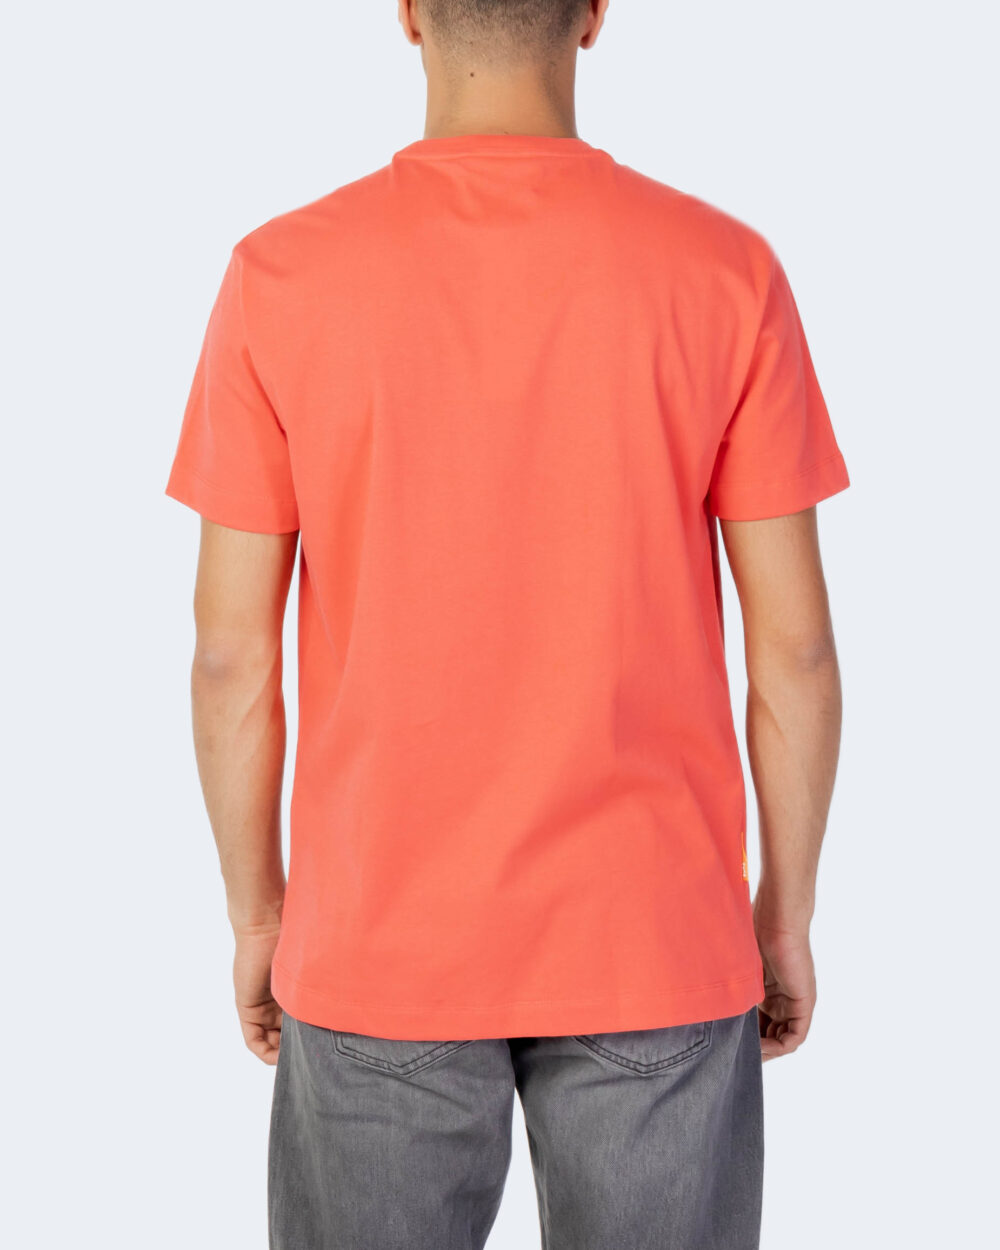 T-shirt Suns paolo suns moon Rosso - Foto 3